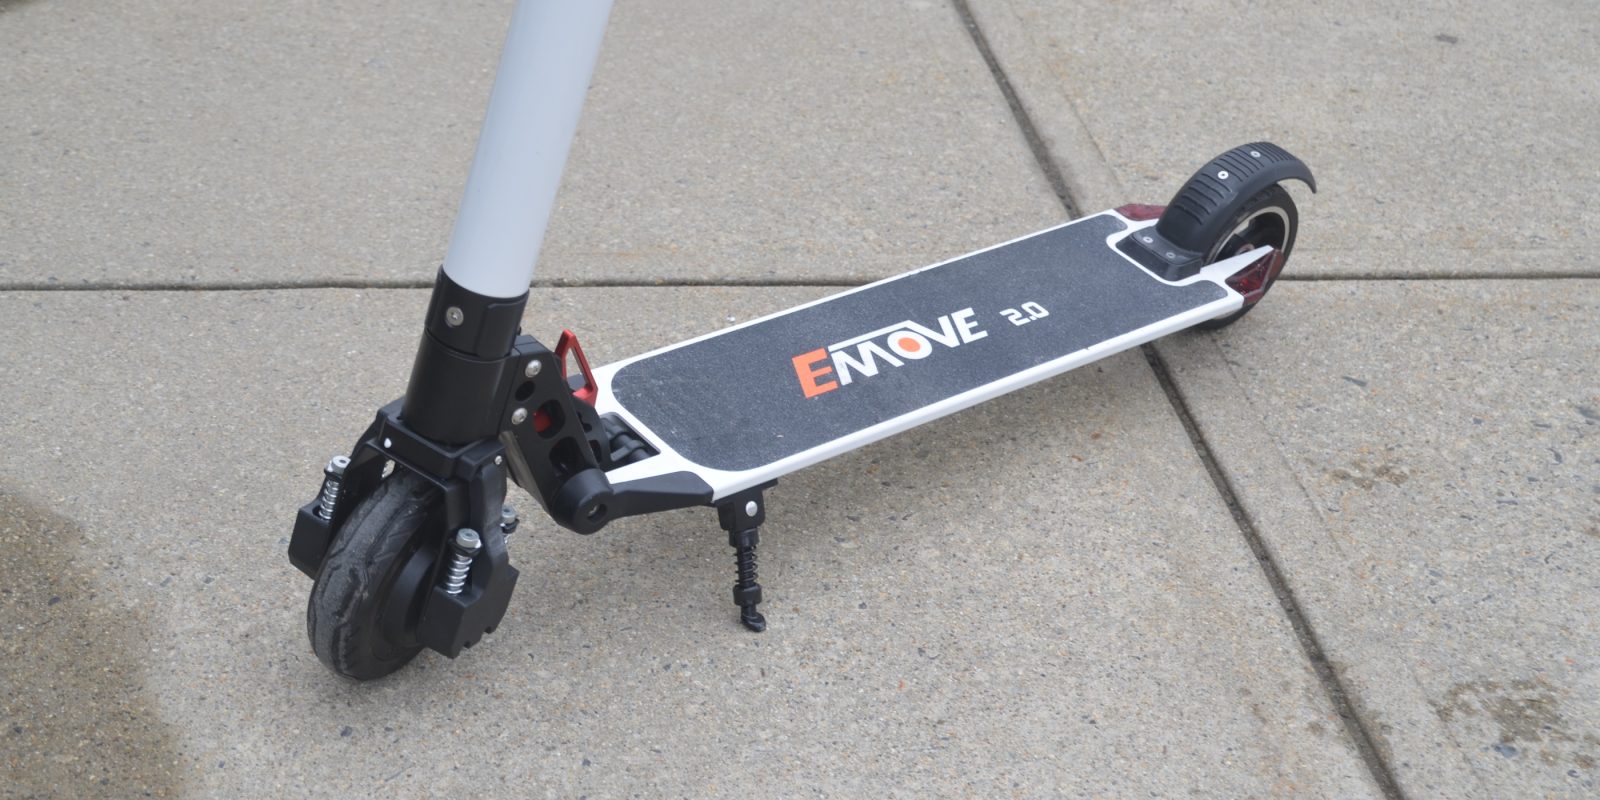 emove 2.0 electric scooter